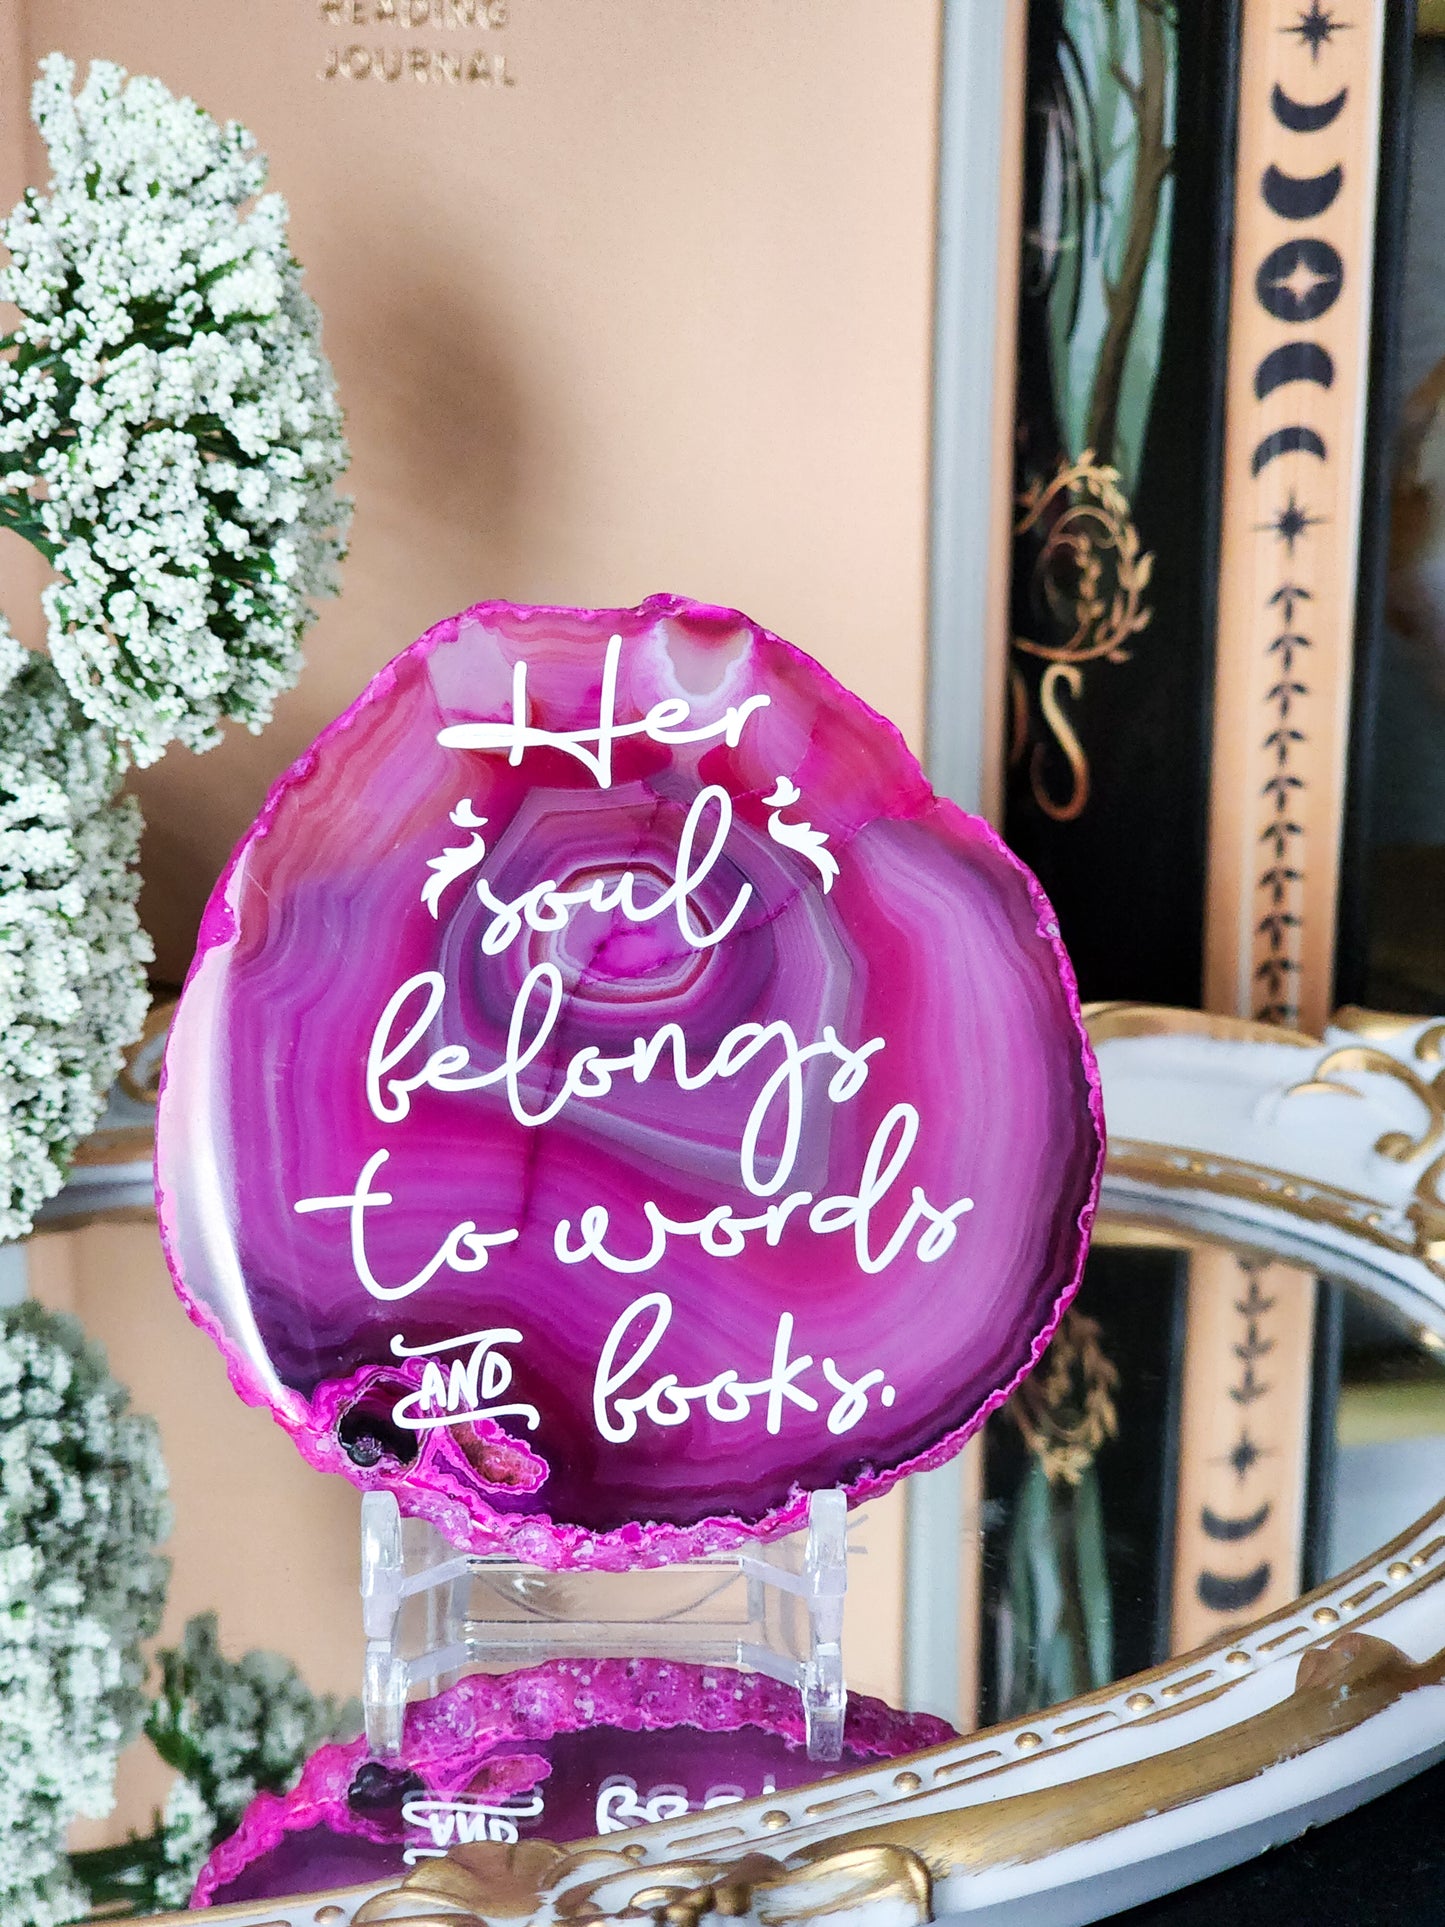 Her Soul belongs to words and books | Pink Agate Slice Shelf Sitter